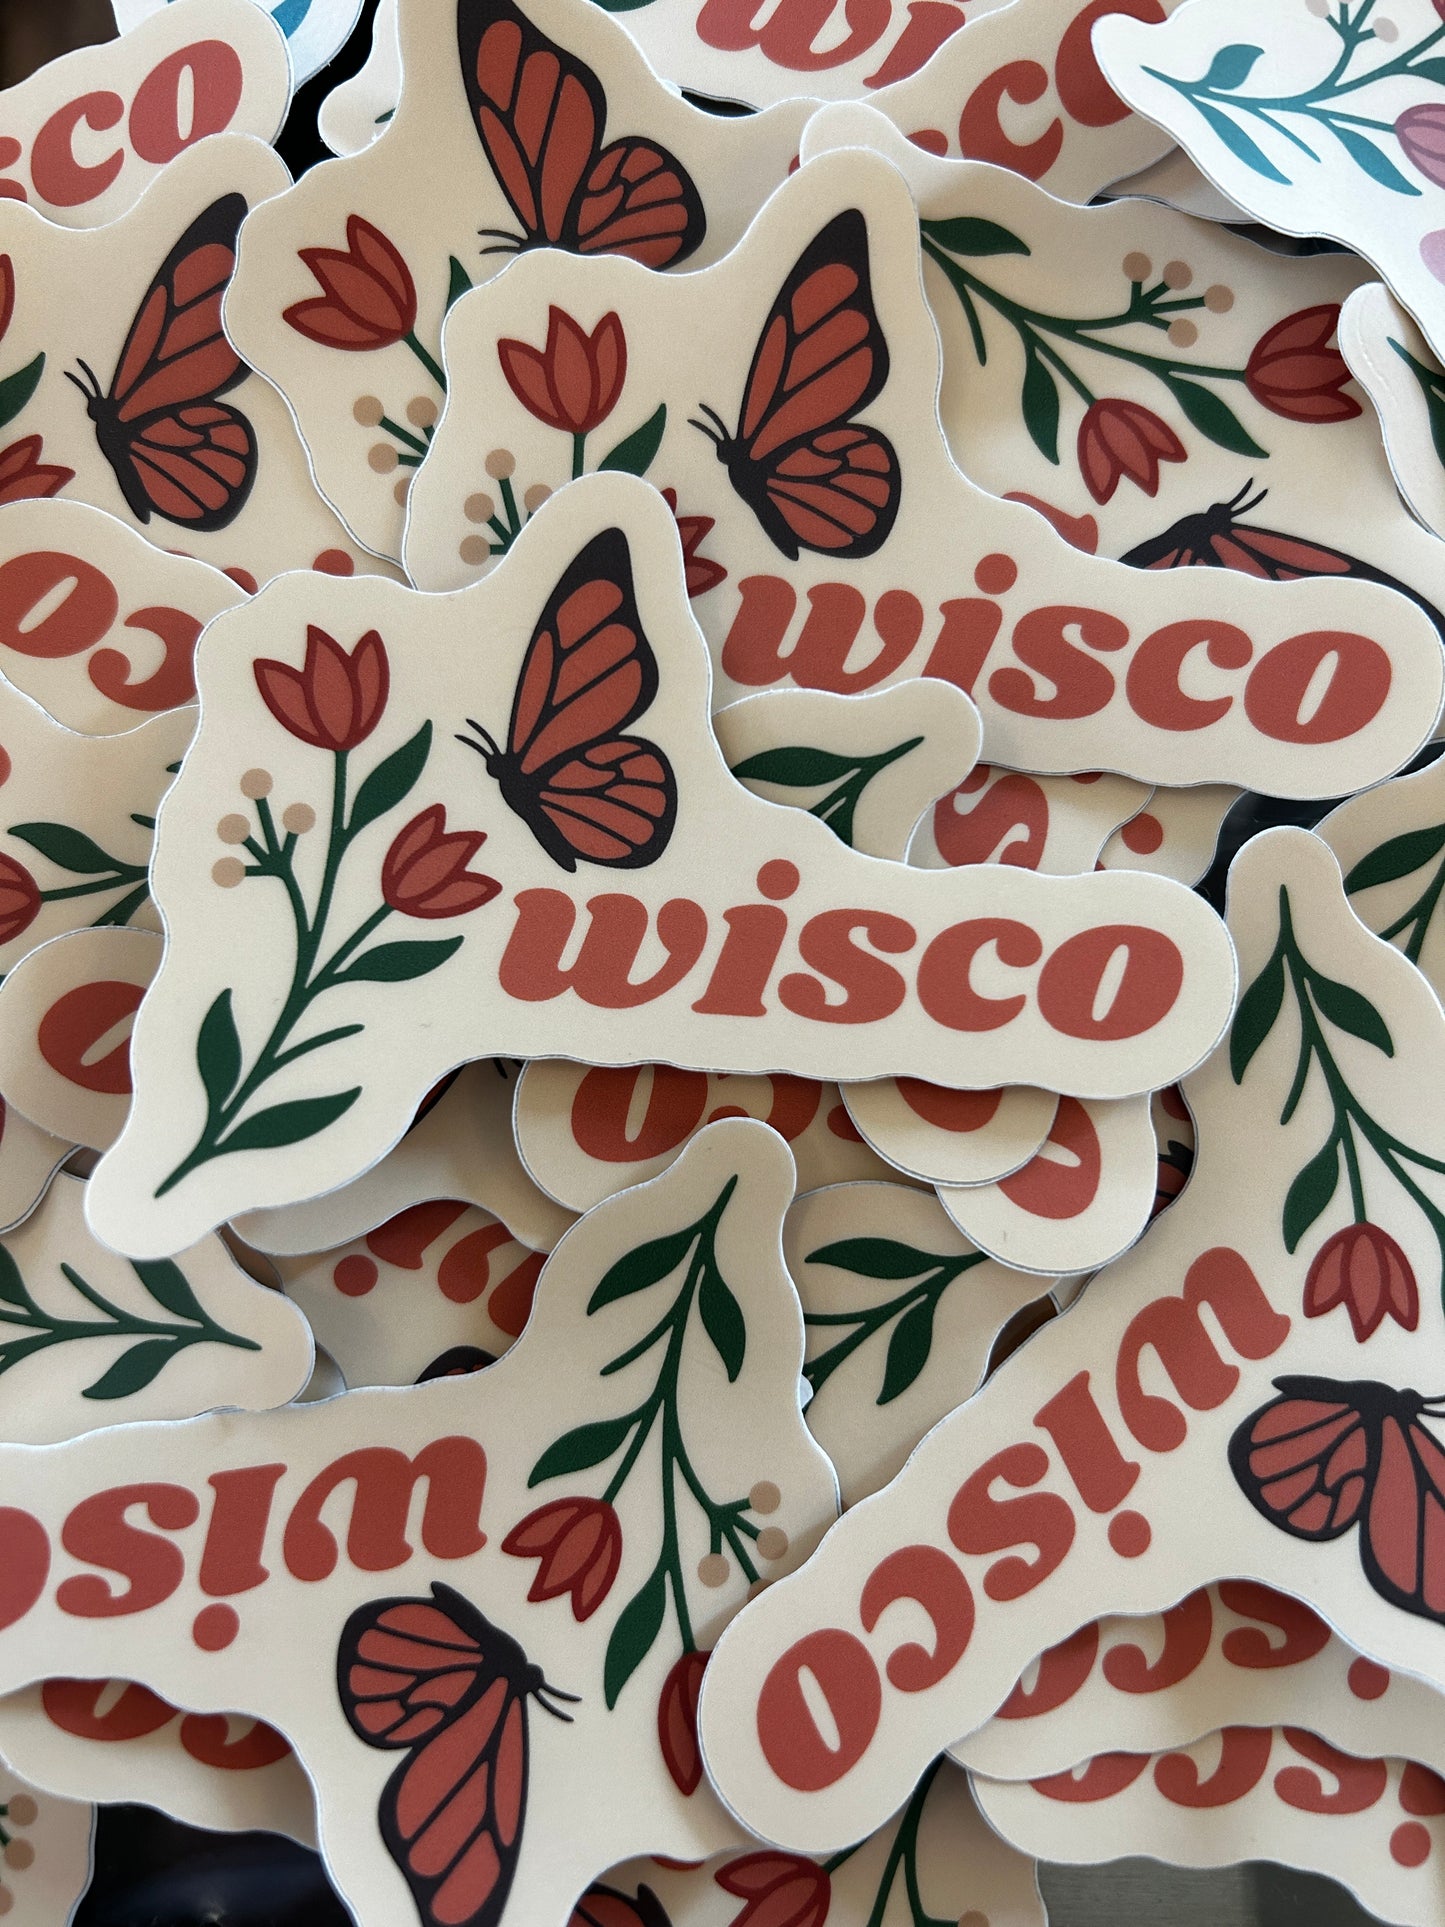 Wisconsin Icons Stickers